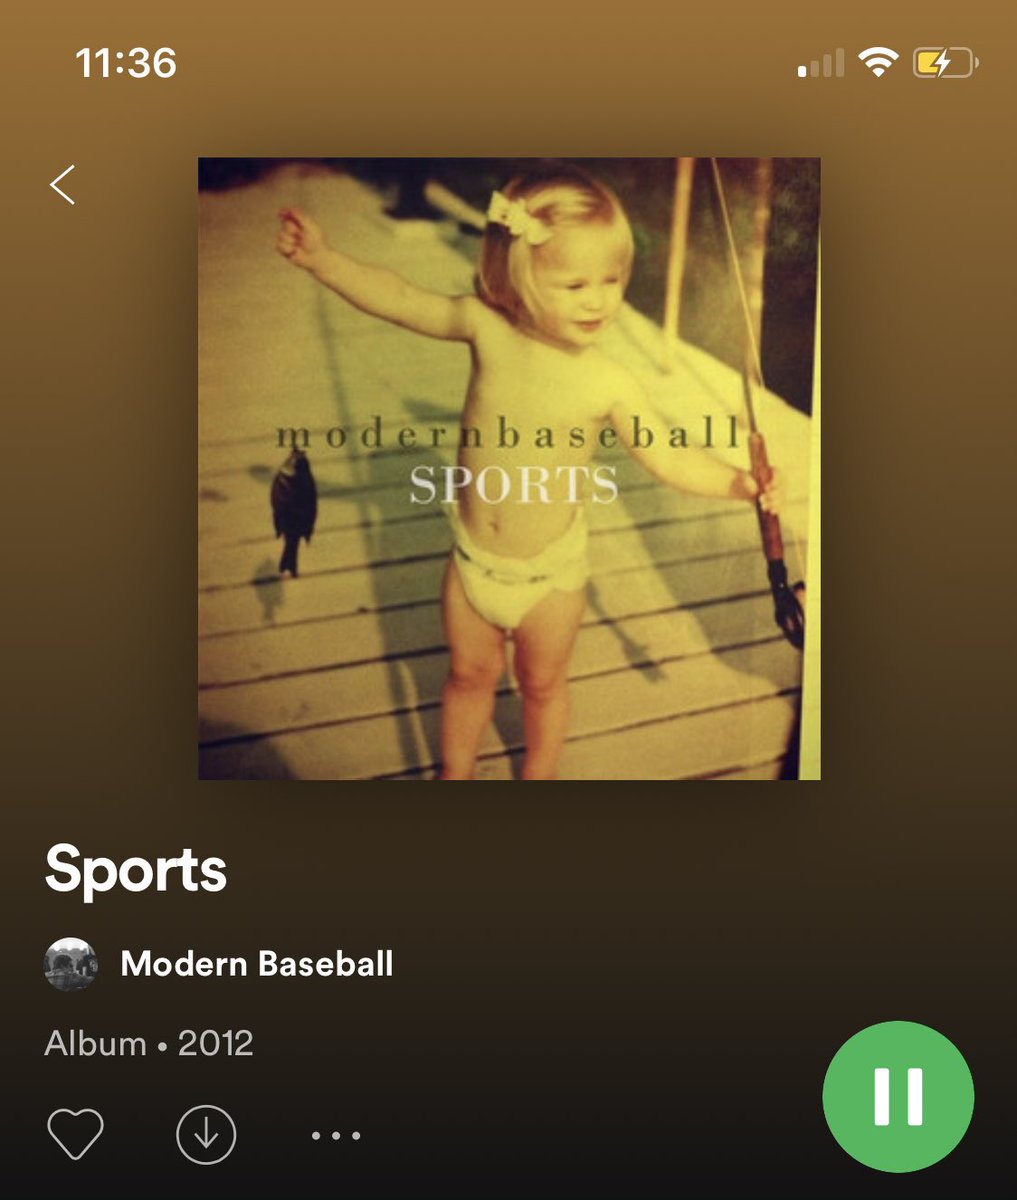 sportsfav songs: re-do, tears over beersi wish i was emo in middle school so i could’ve listened to this in its peak smh